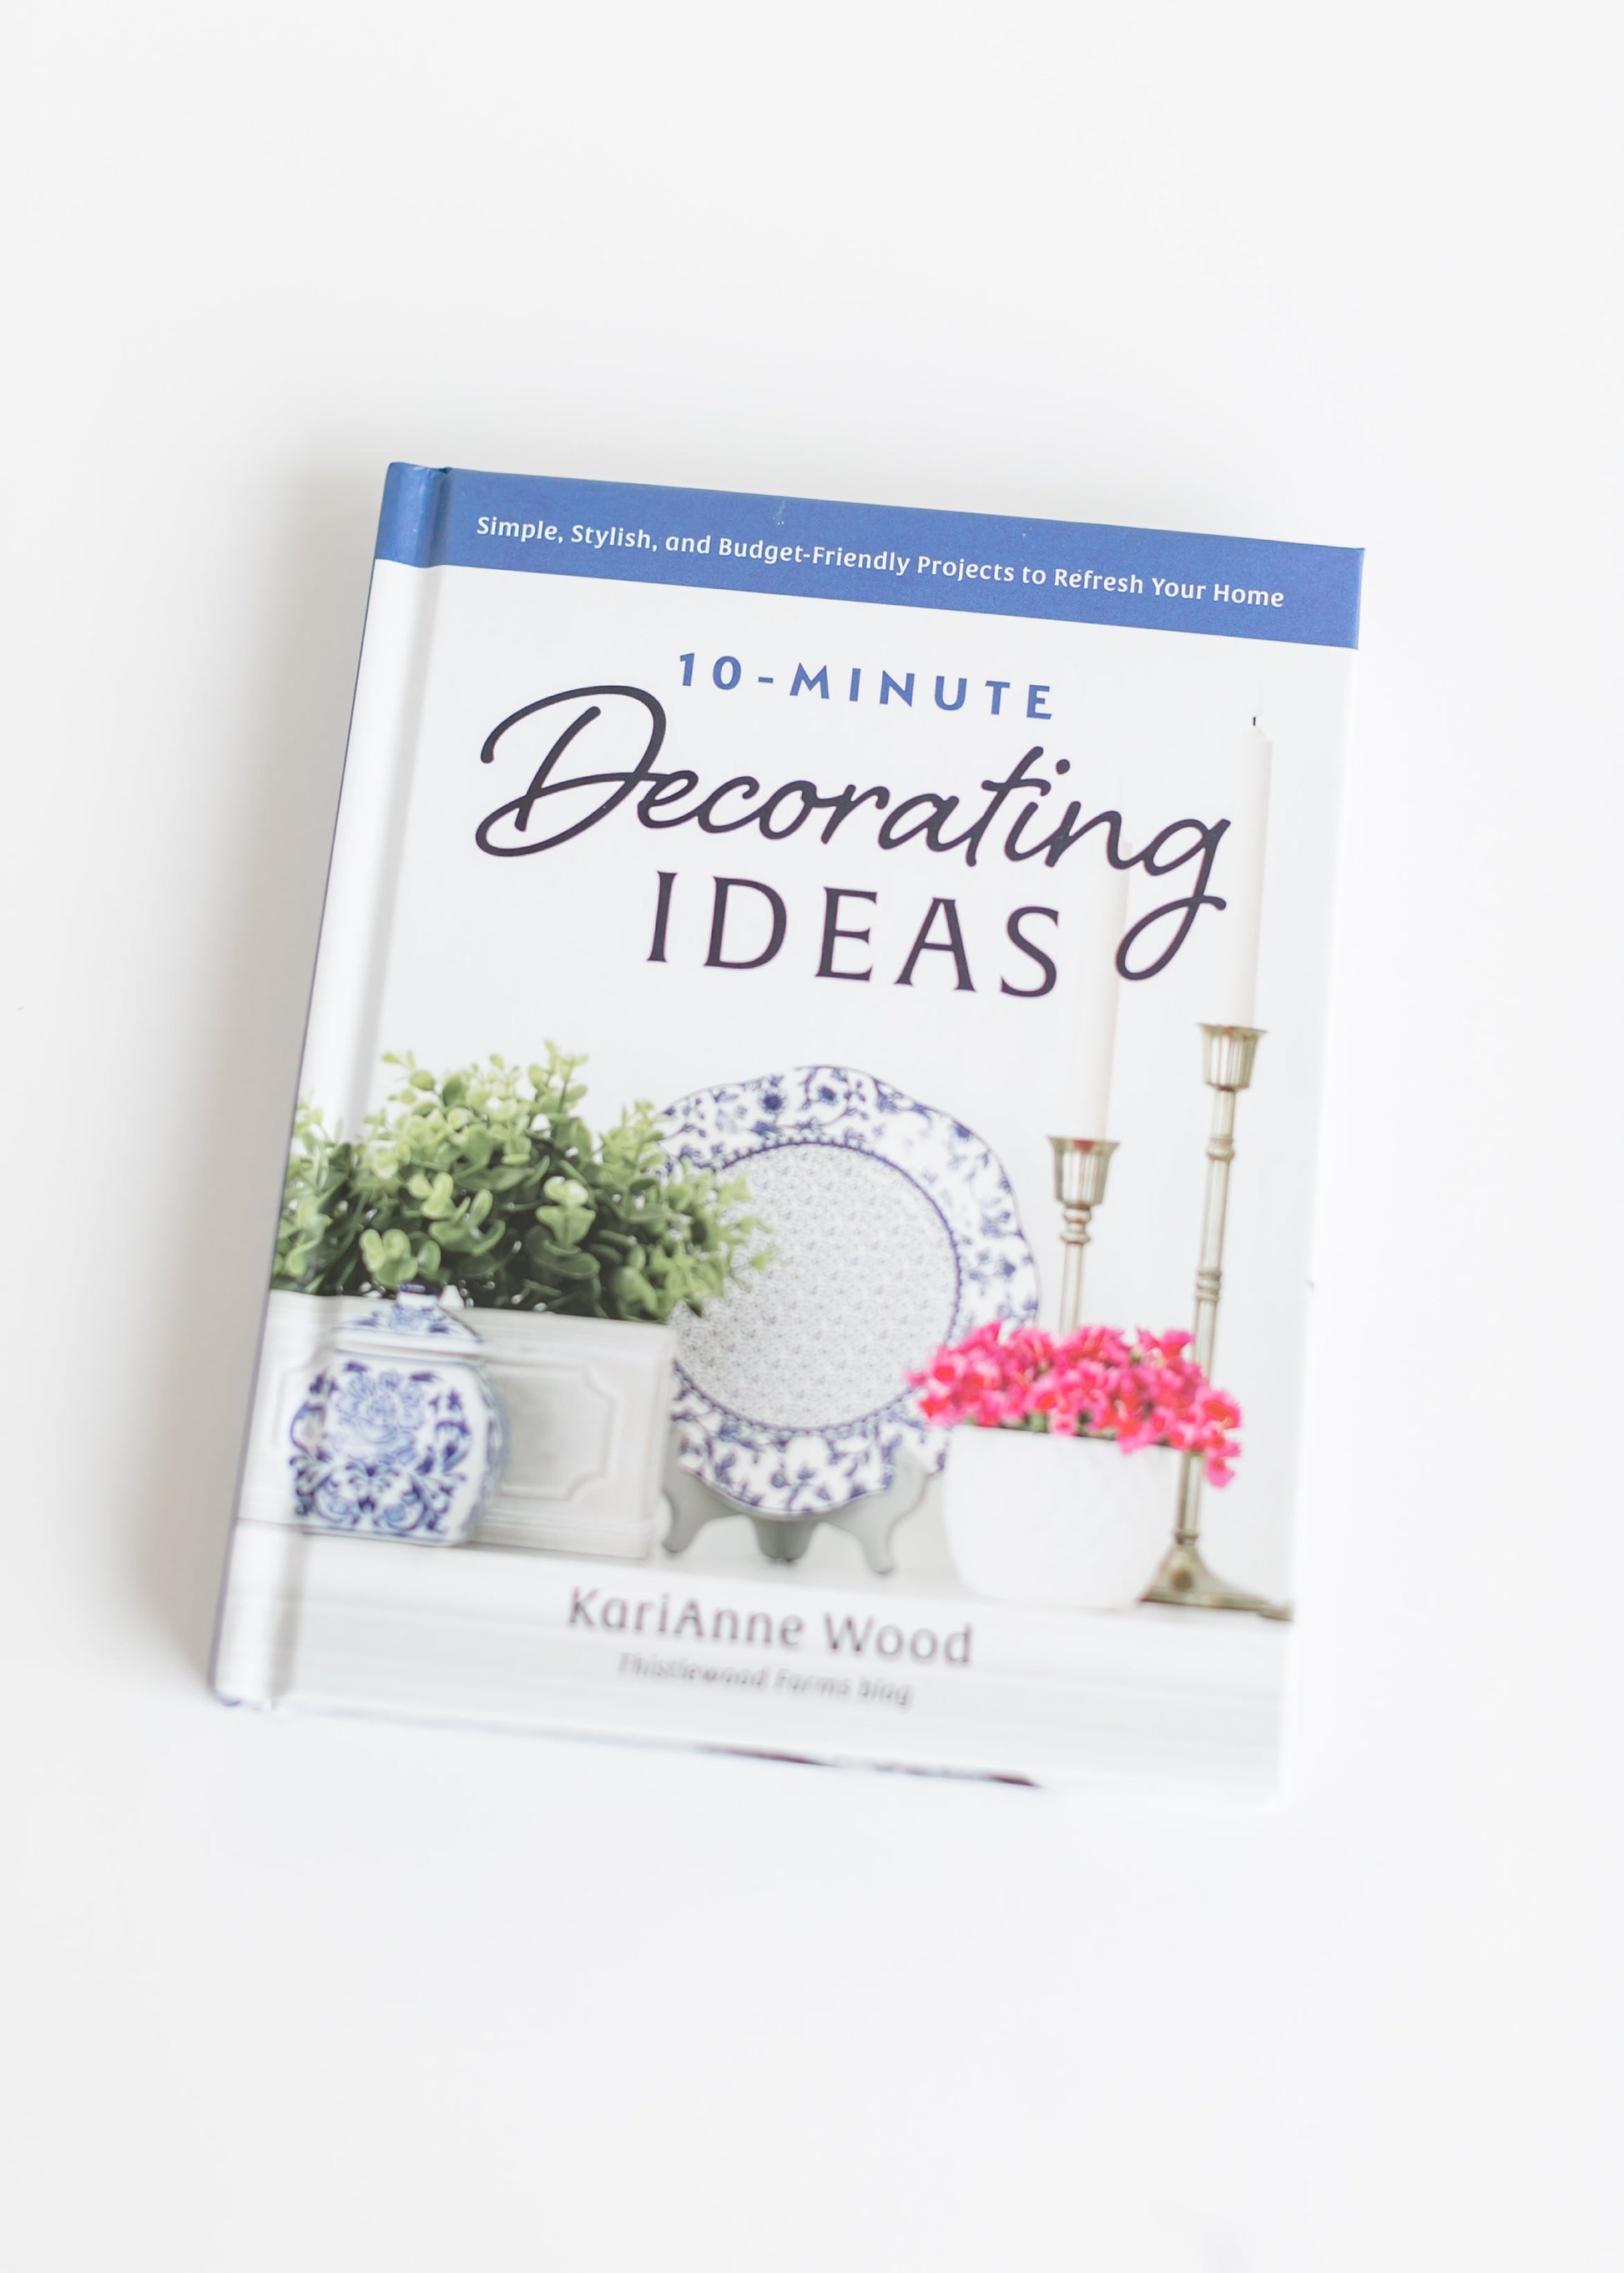 10-Minute Decorating Ideas Book Gifts